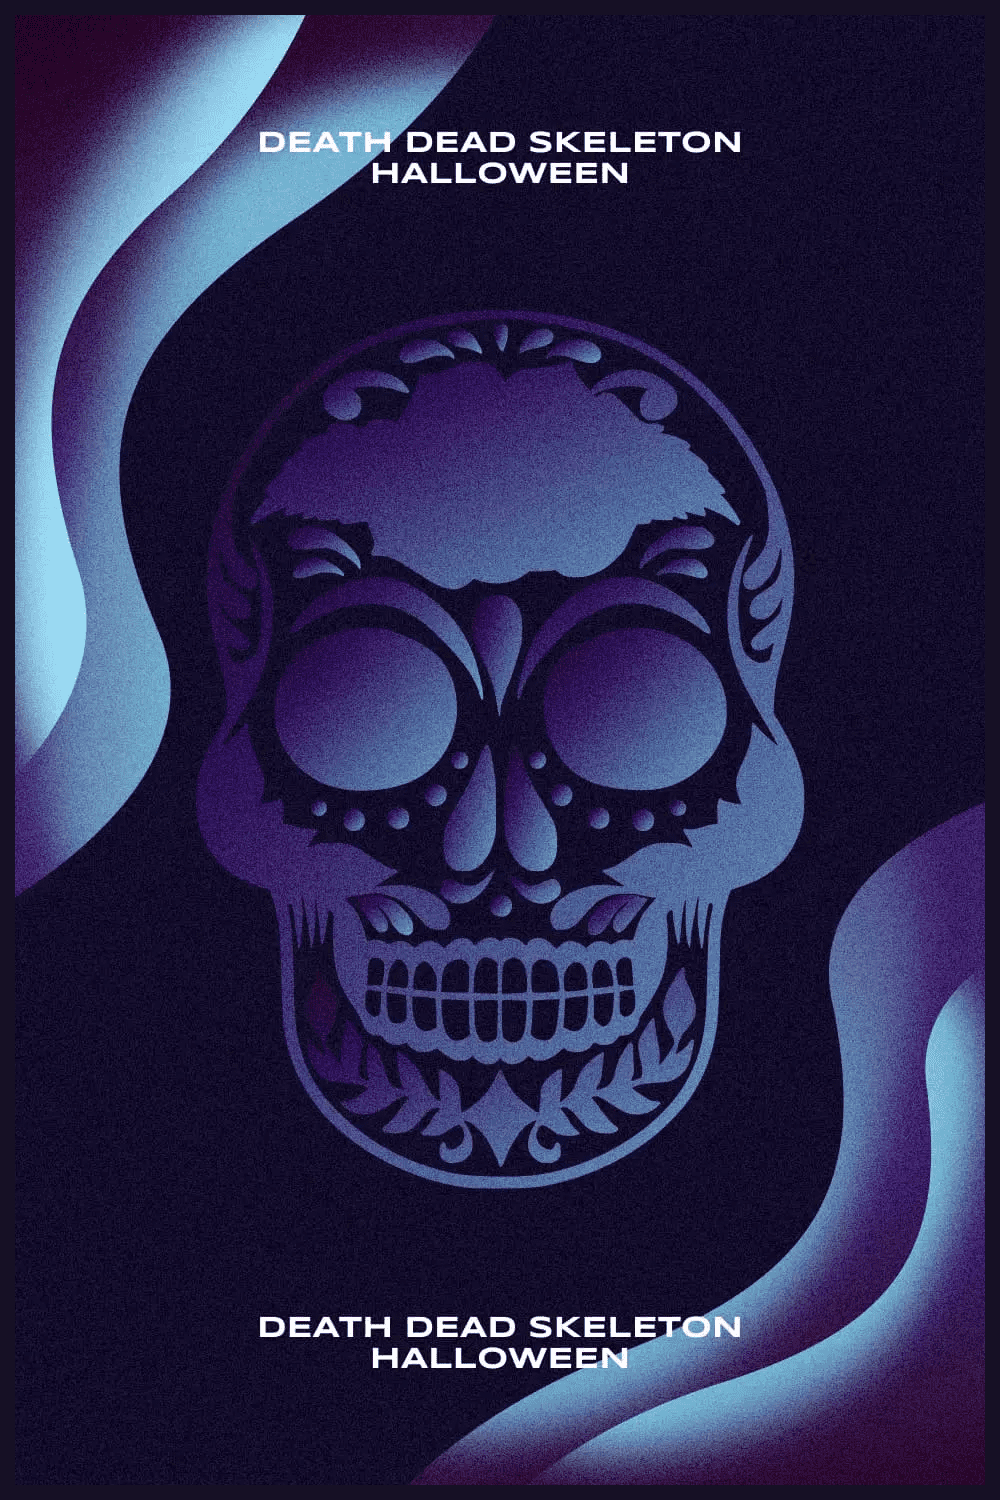 Sketch of a painted skull on a blue background.